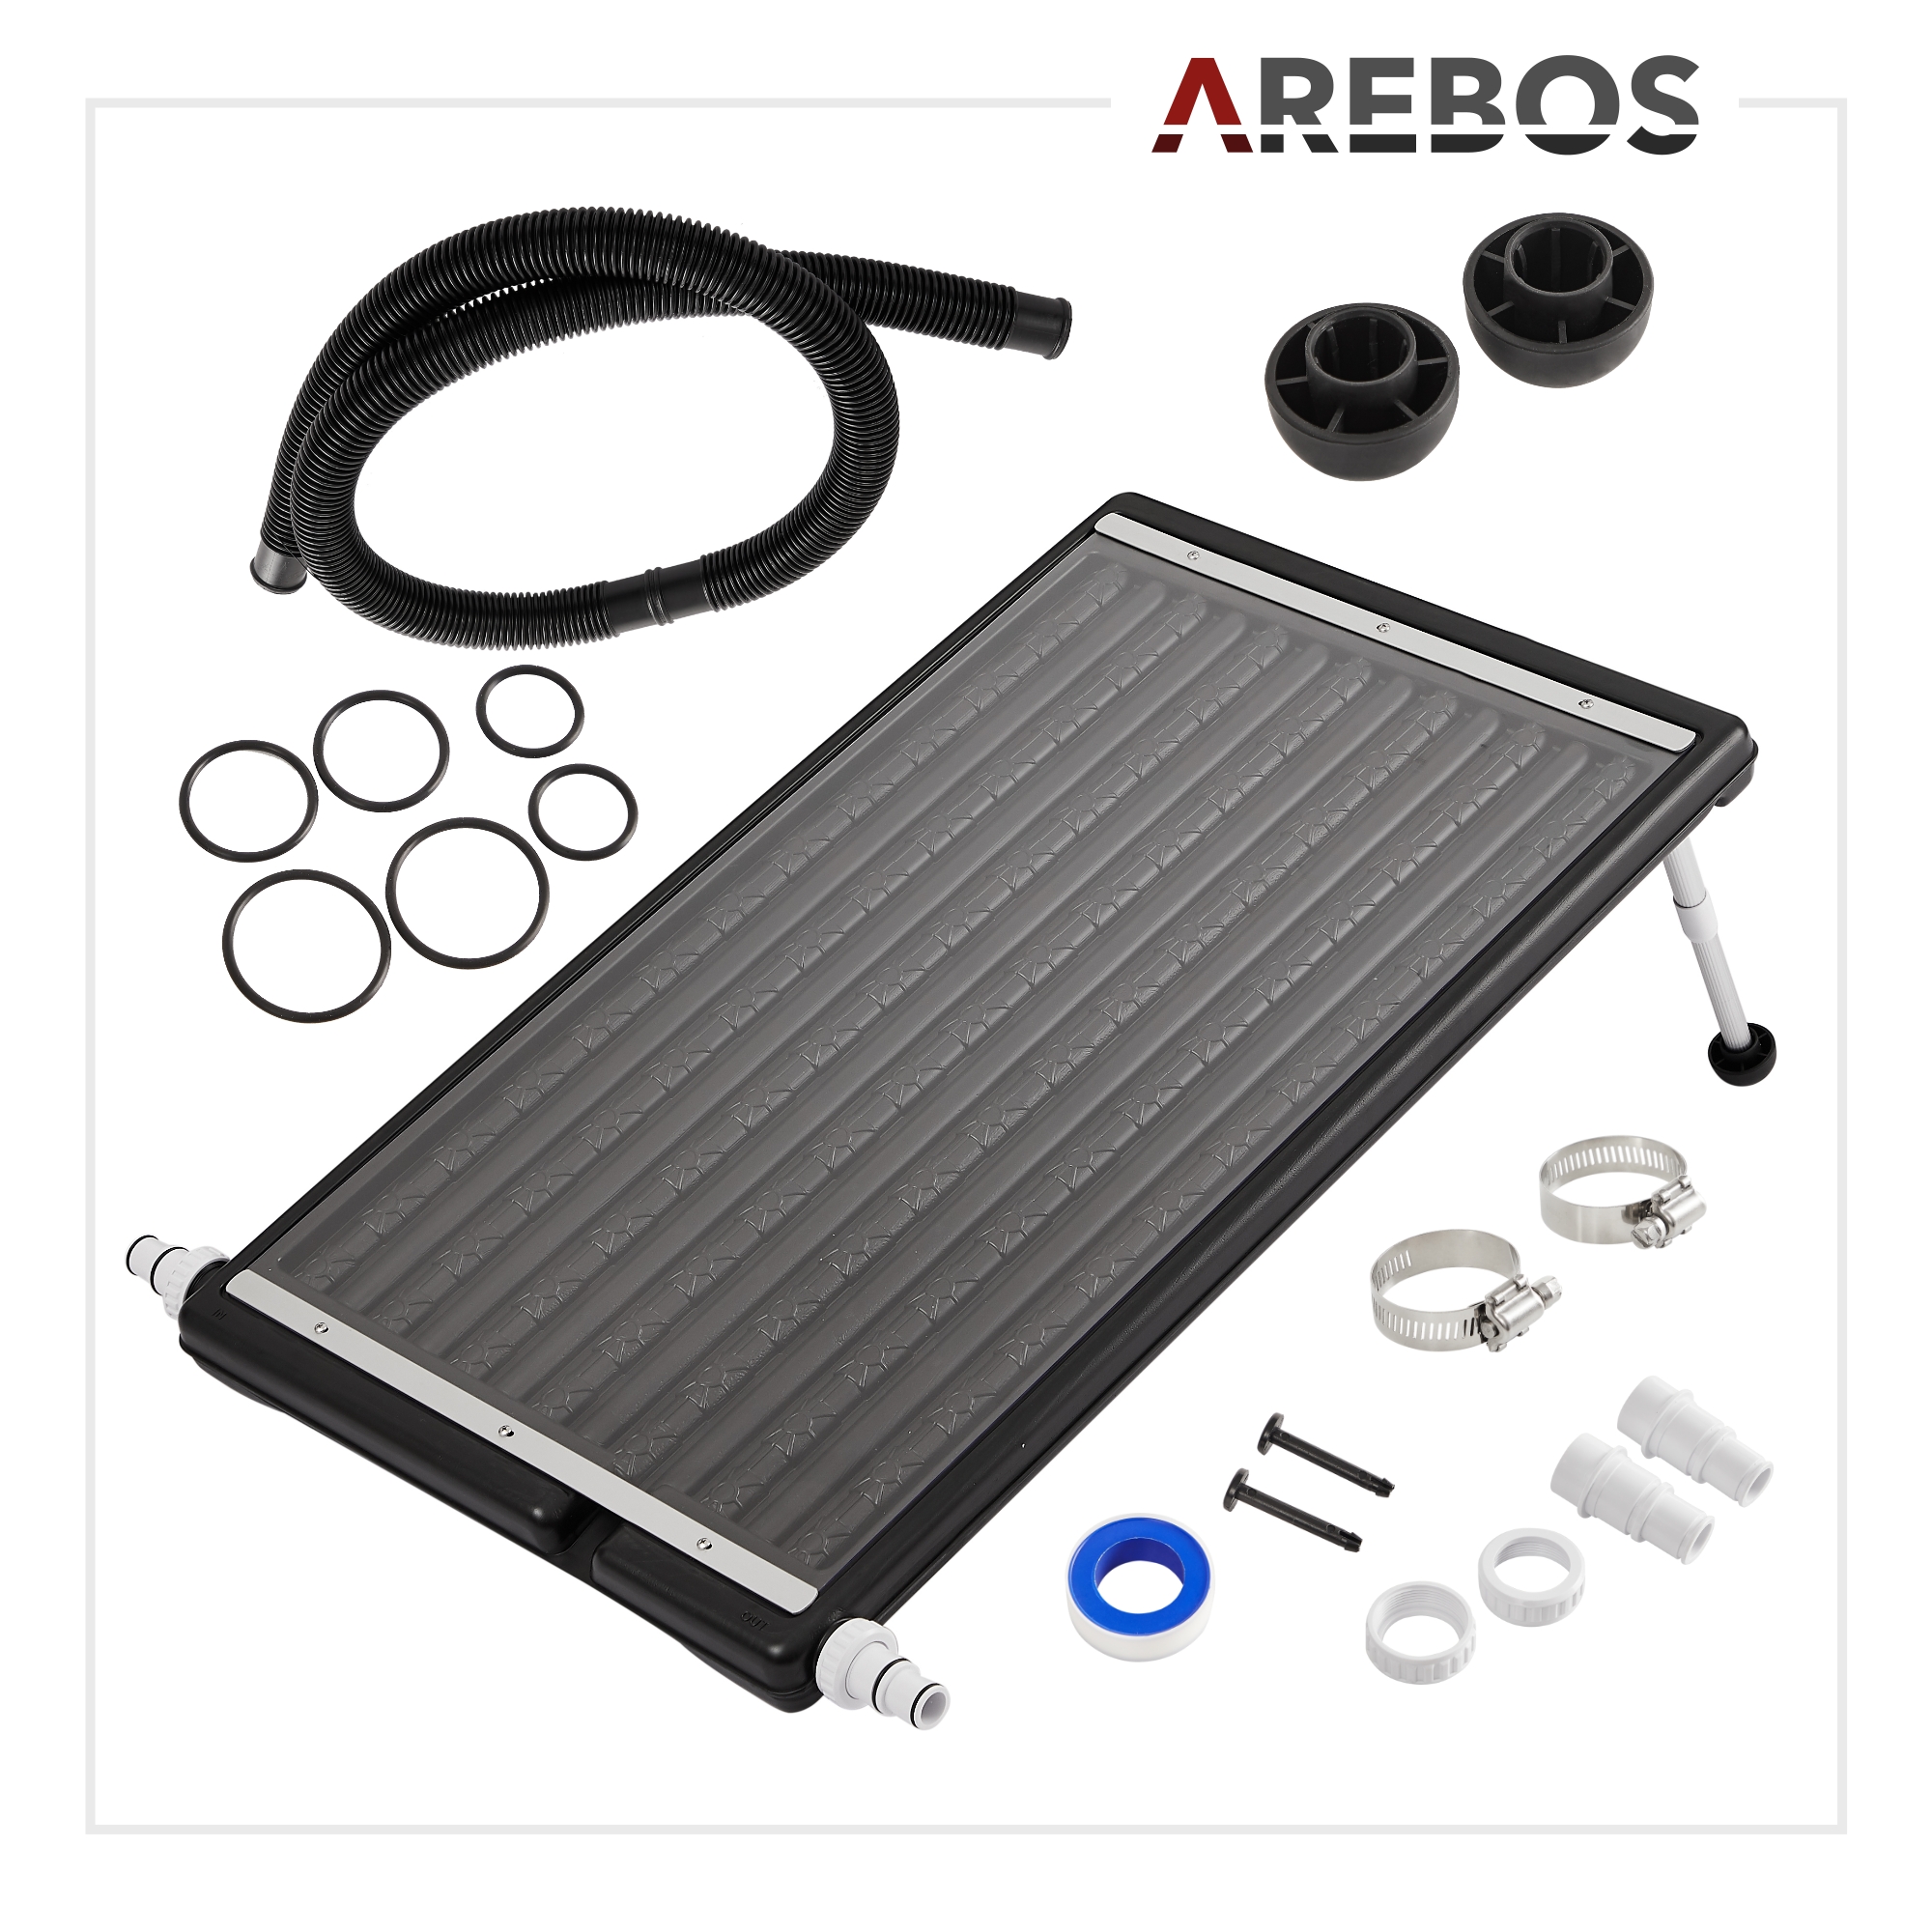 Arebos - 2 x AREBOS Chauffage Solaire Collecteur Solaire Chauffage de  Piscine Tapis Solaire Absorbeur Solaire 66x300 cm - Réchauffeur de piscine  - Rue du Commerce